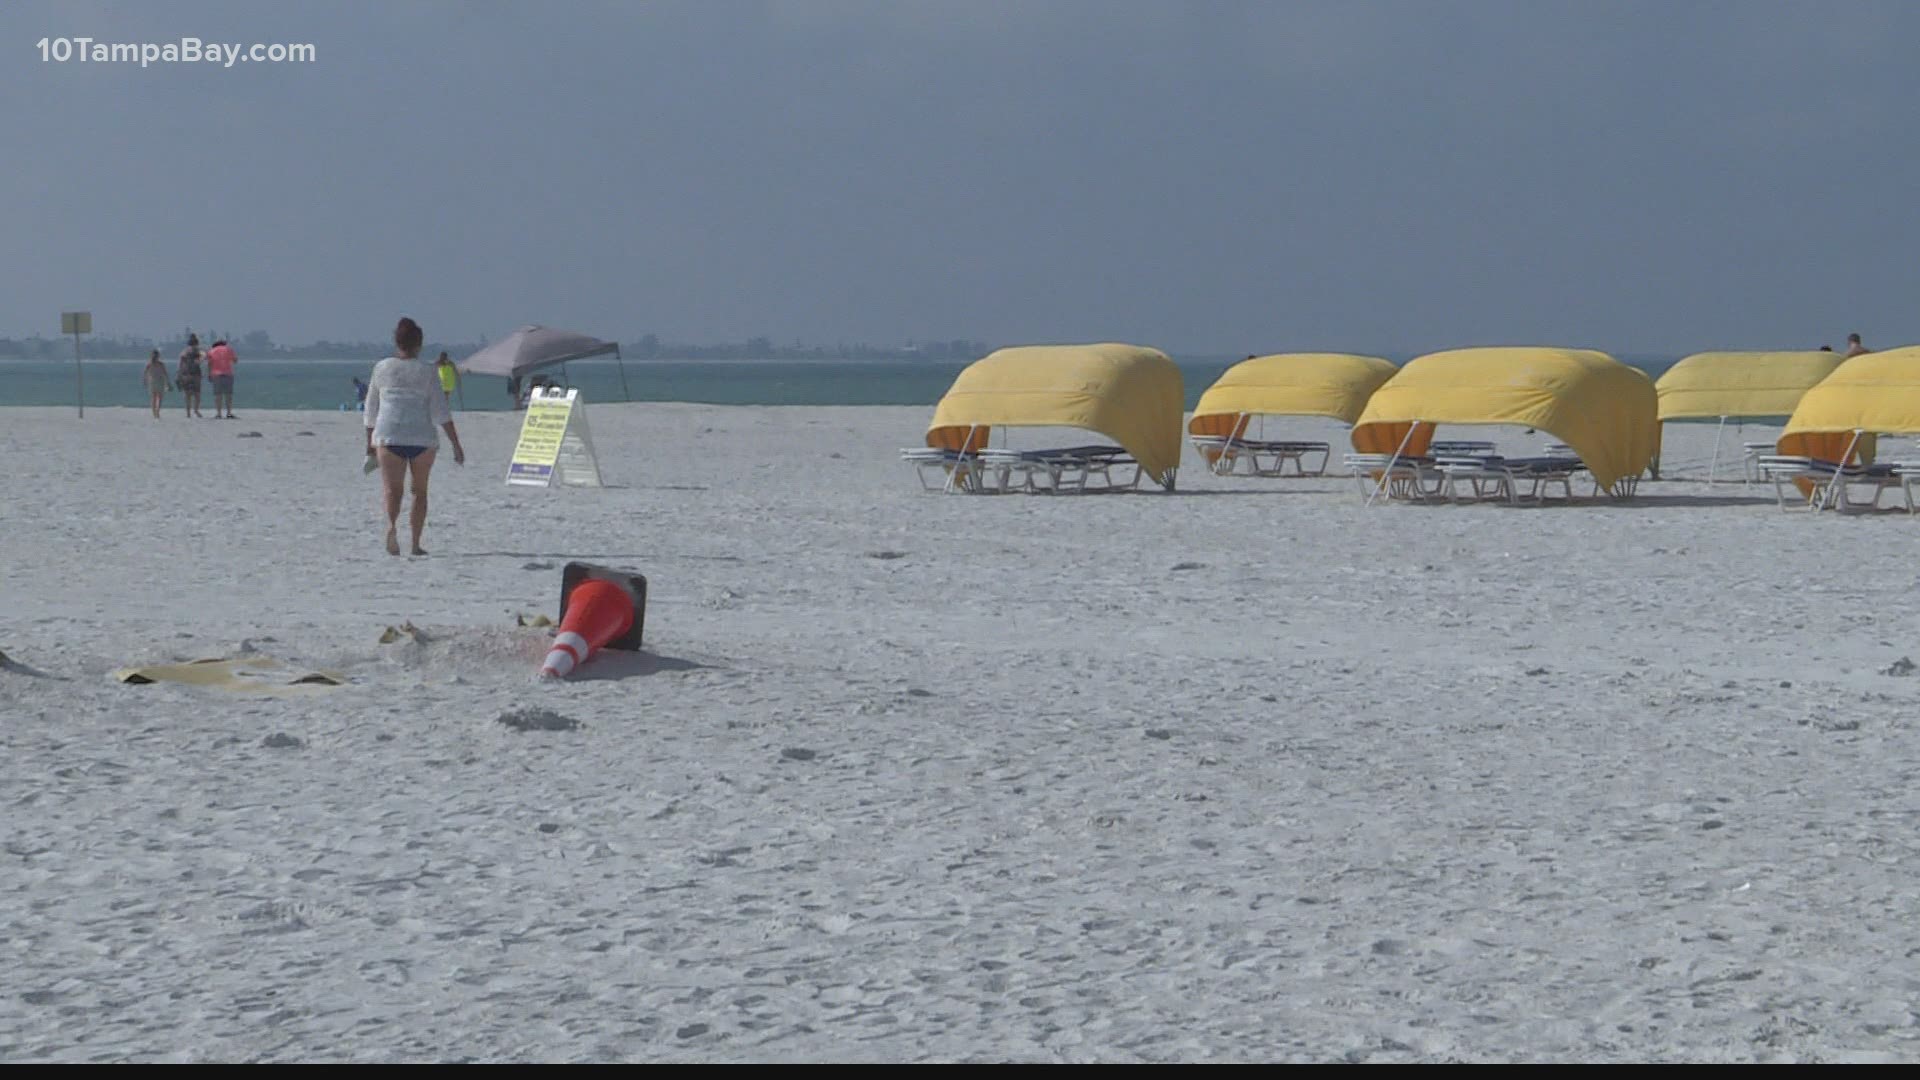 Four other Tampa Bay area beaches also secured a spot on the list.